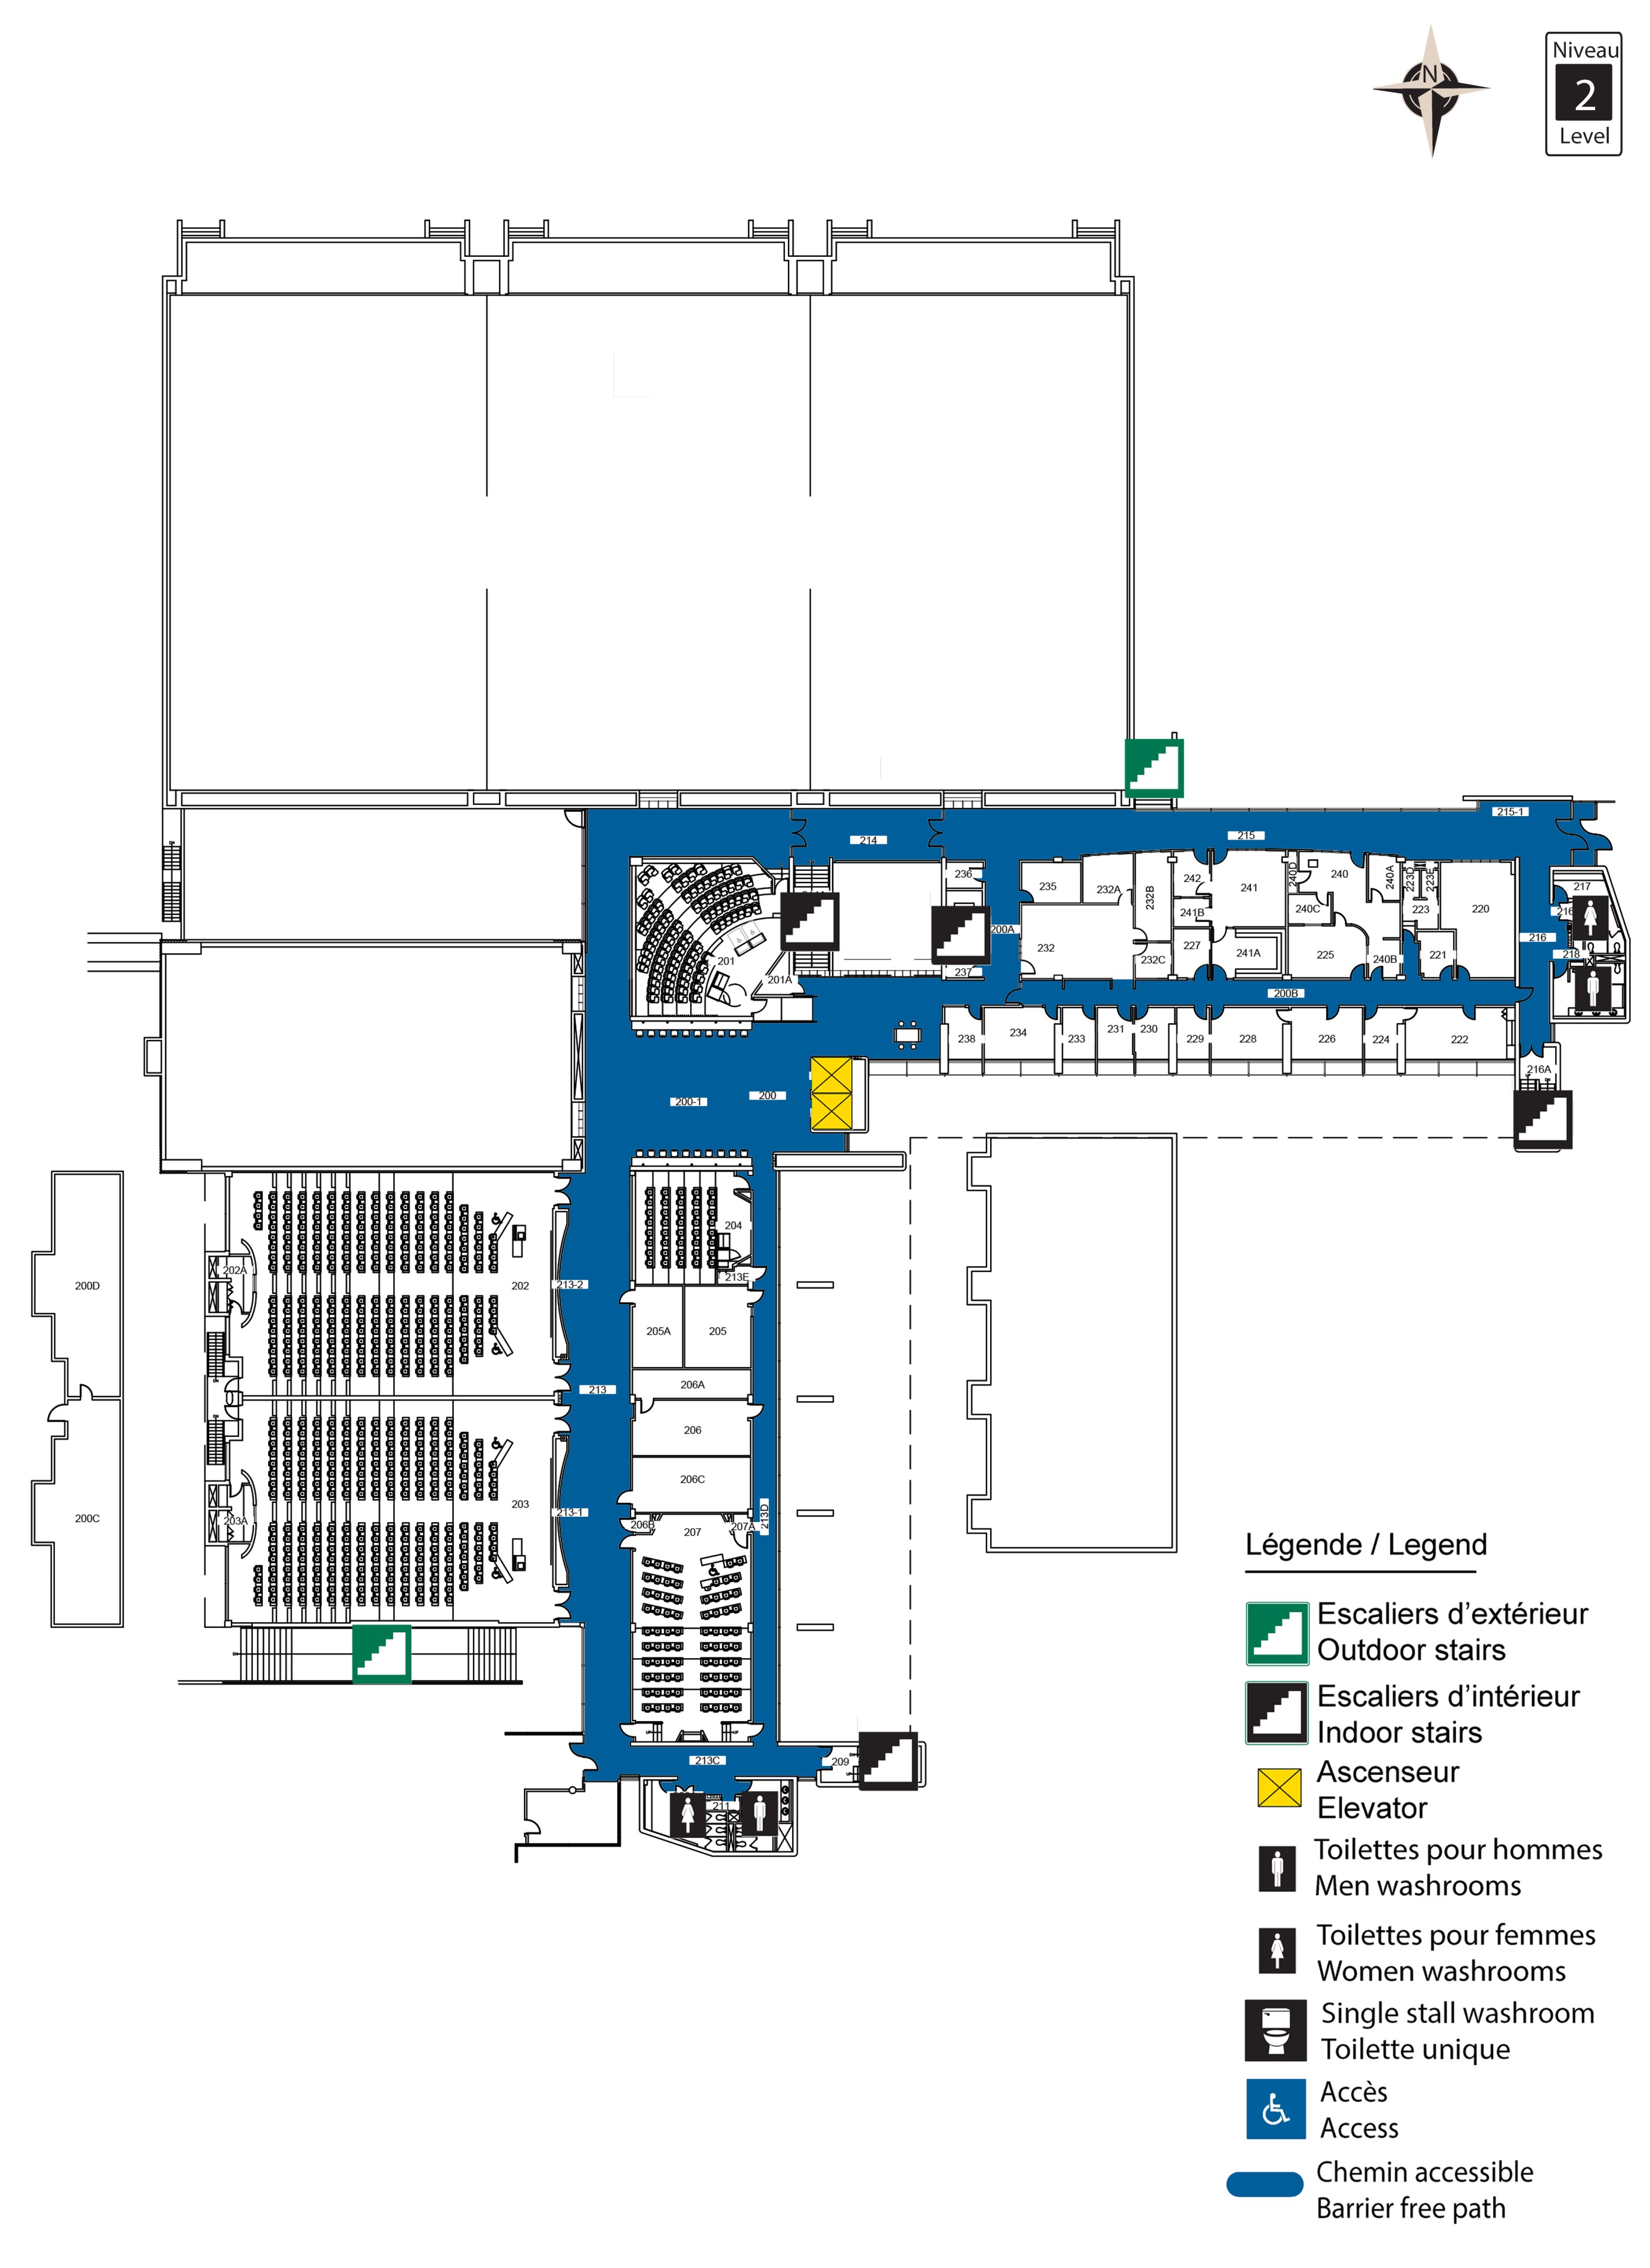 Accessible map of MNT level 2